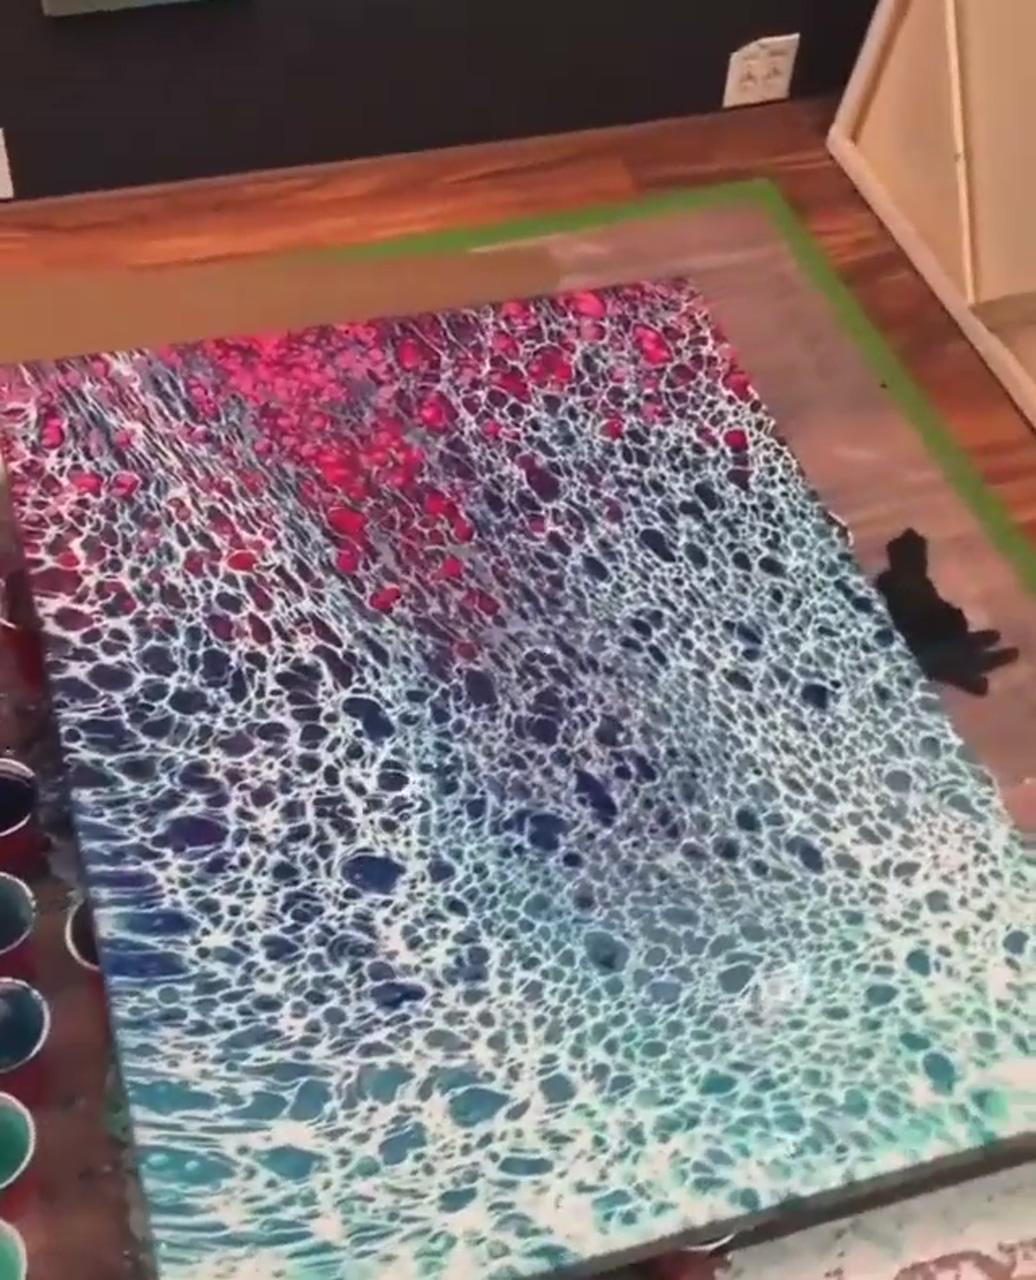 Acrylic art projects | flow painting